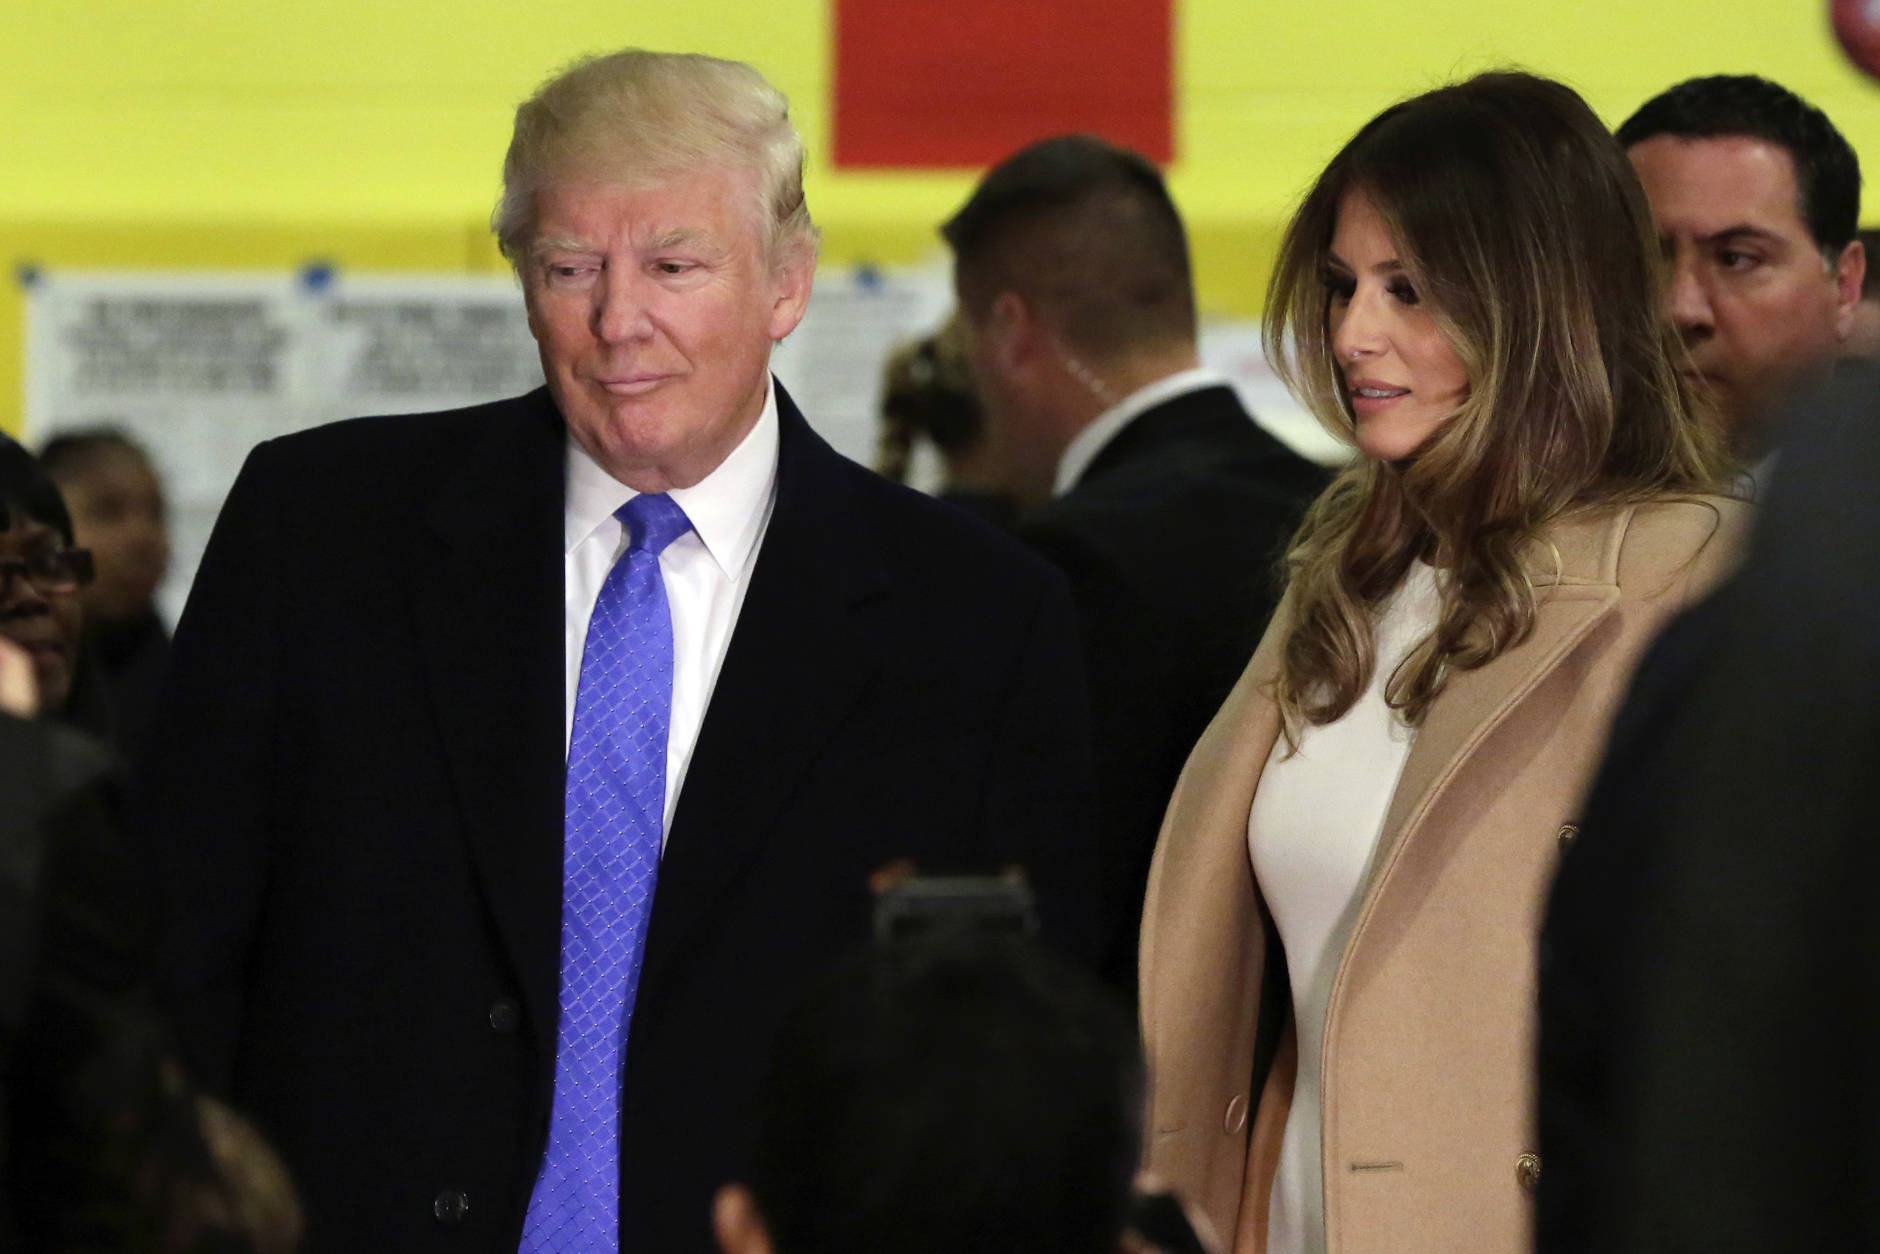 Republican presidential candidate Donald Trump and his wife Melania prepare to leave after voting, in New York, Tuesday, Nov. 8, 2016. (AP Photo/Richard Drew)